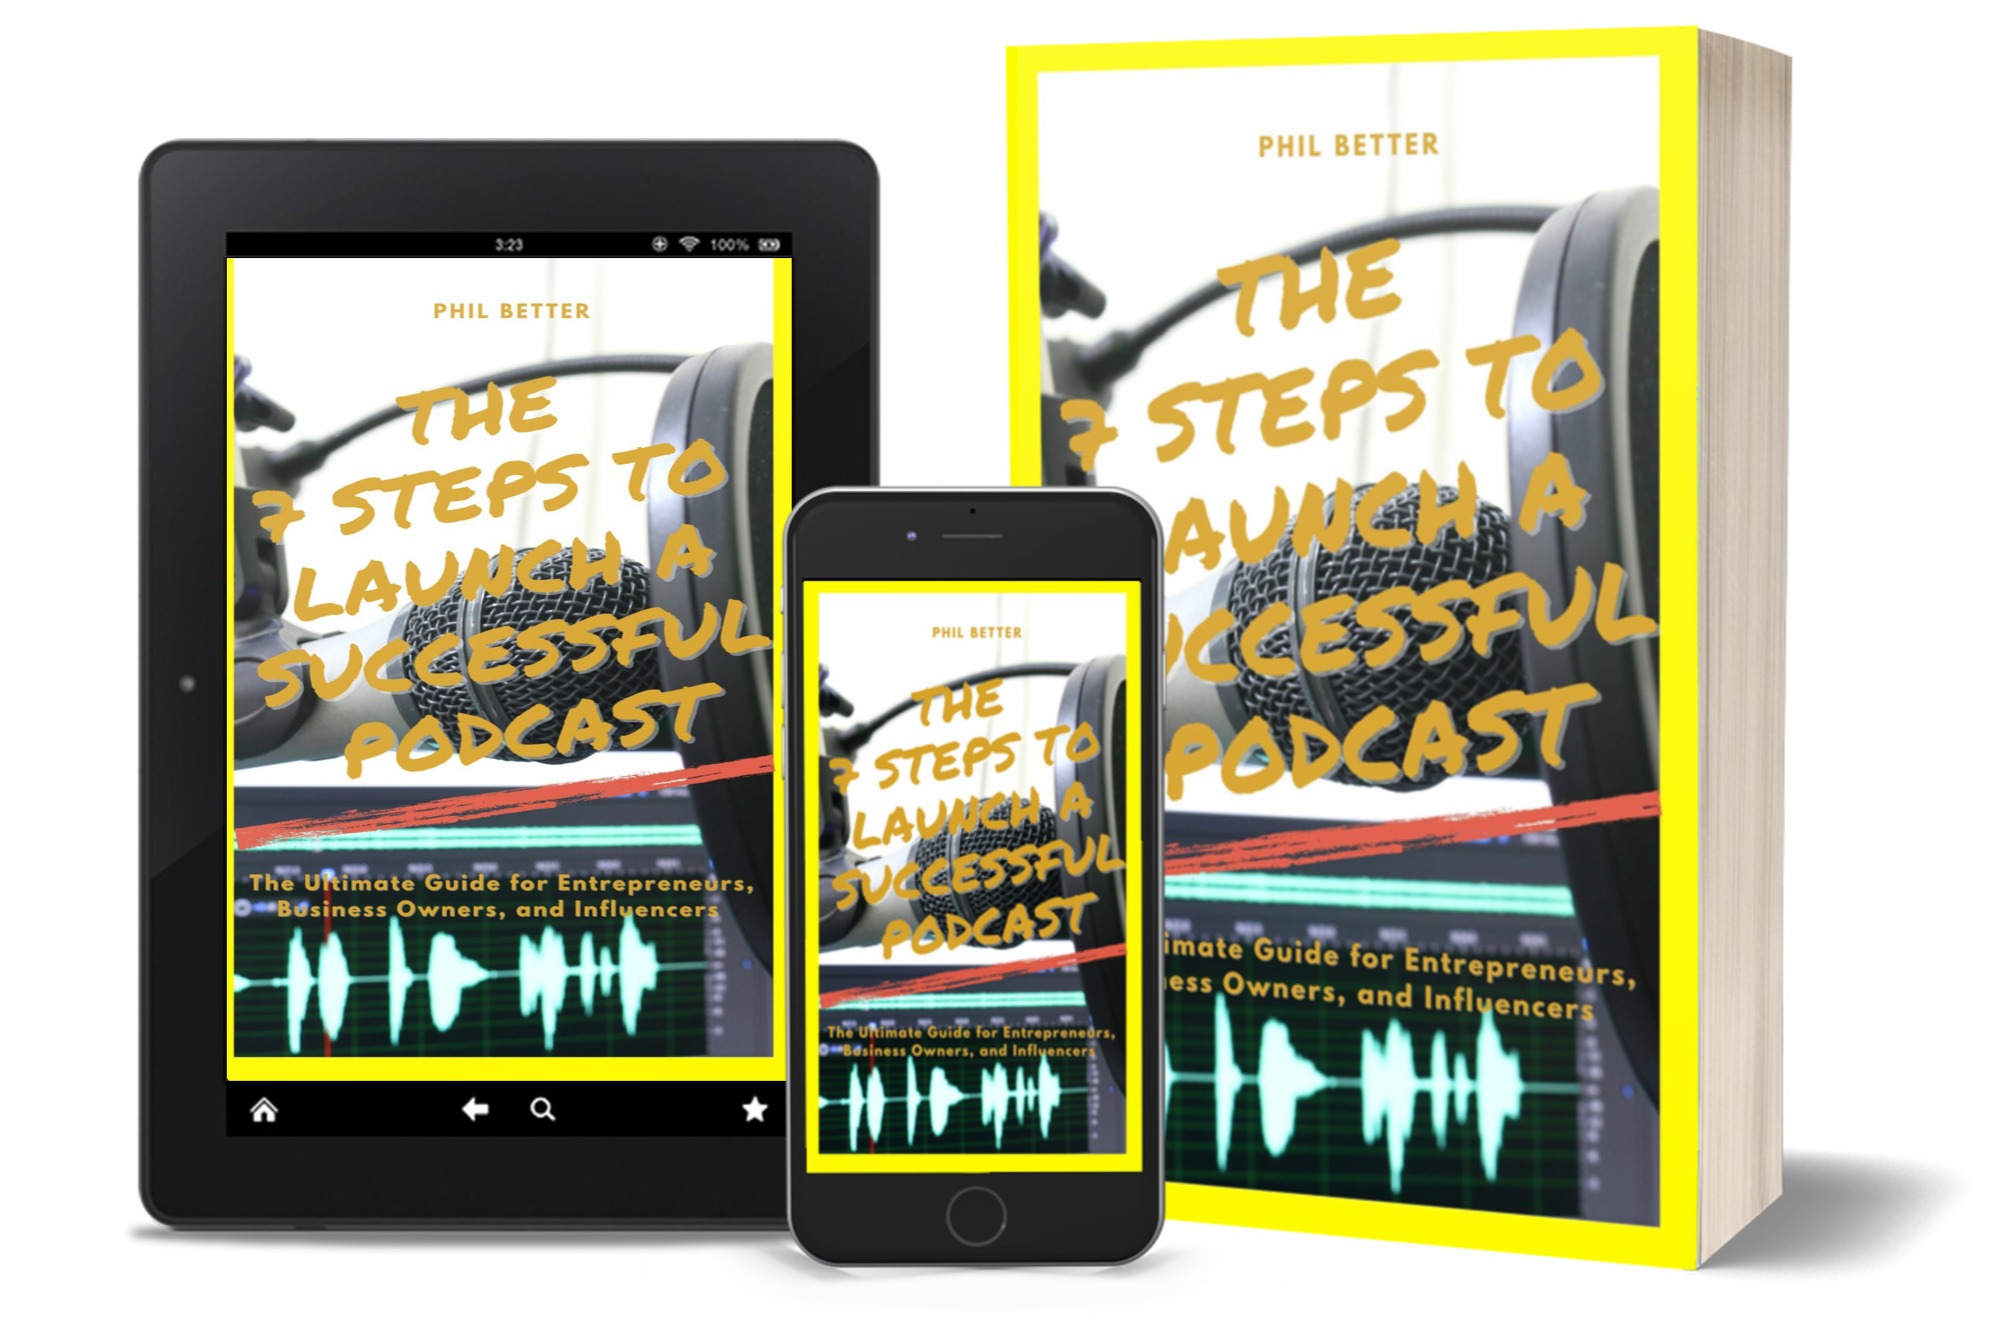 7 Steps To Launch A Successful Podcast with Phil Better, The Podcast Mogul ~ Investinyourselfpod.com